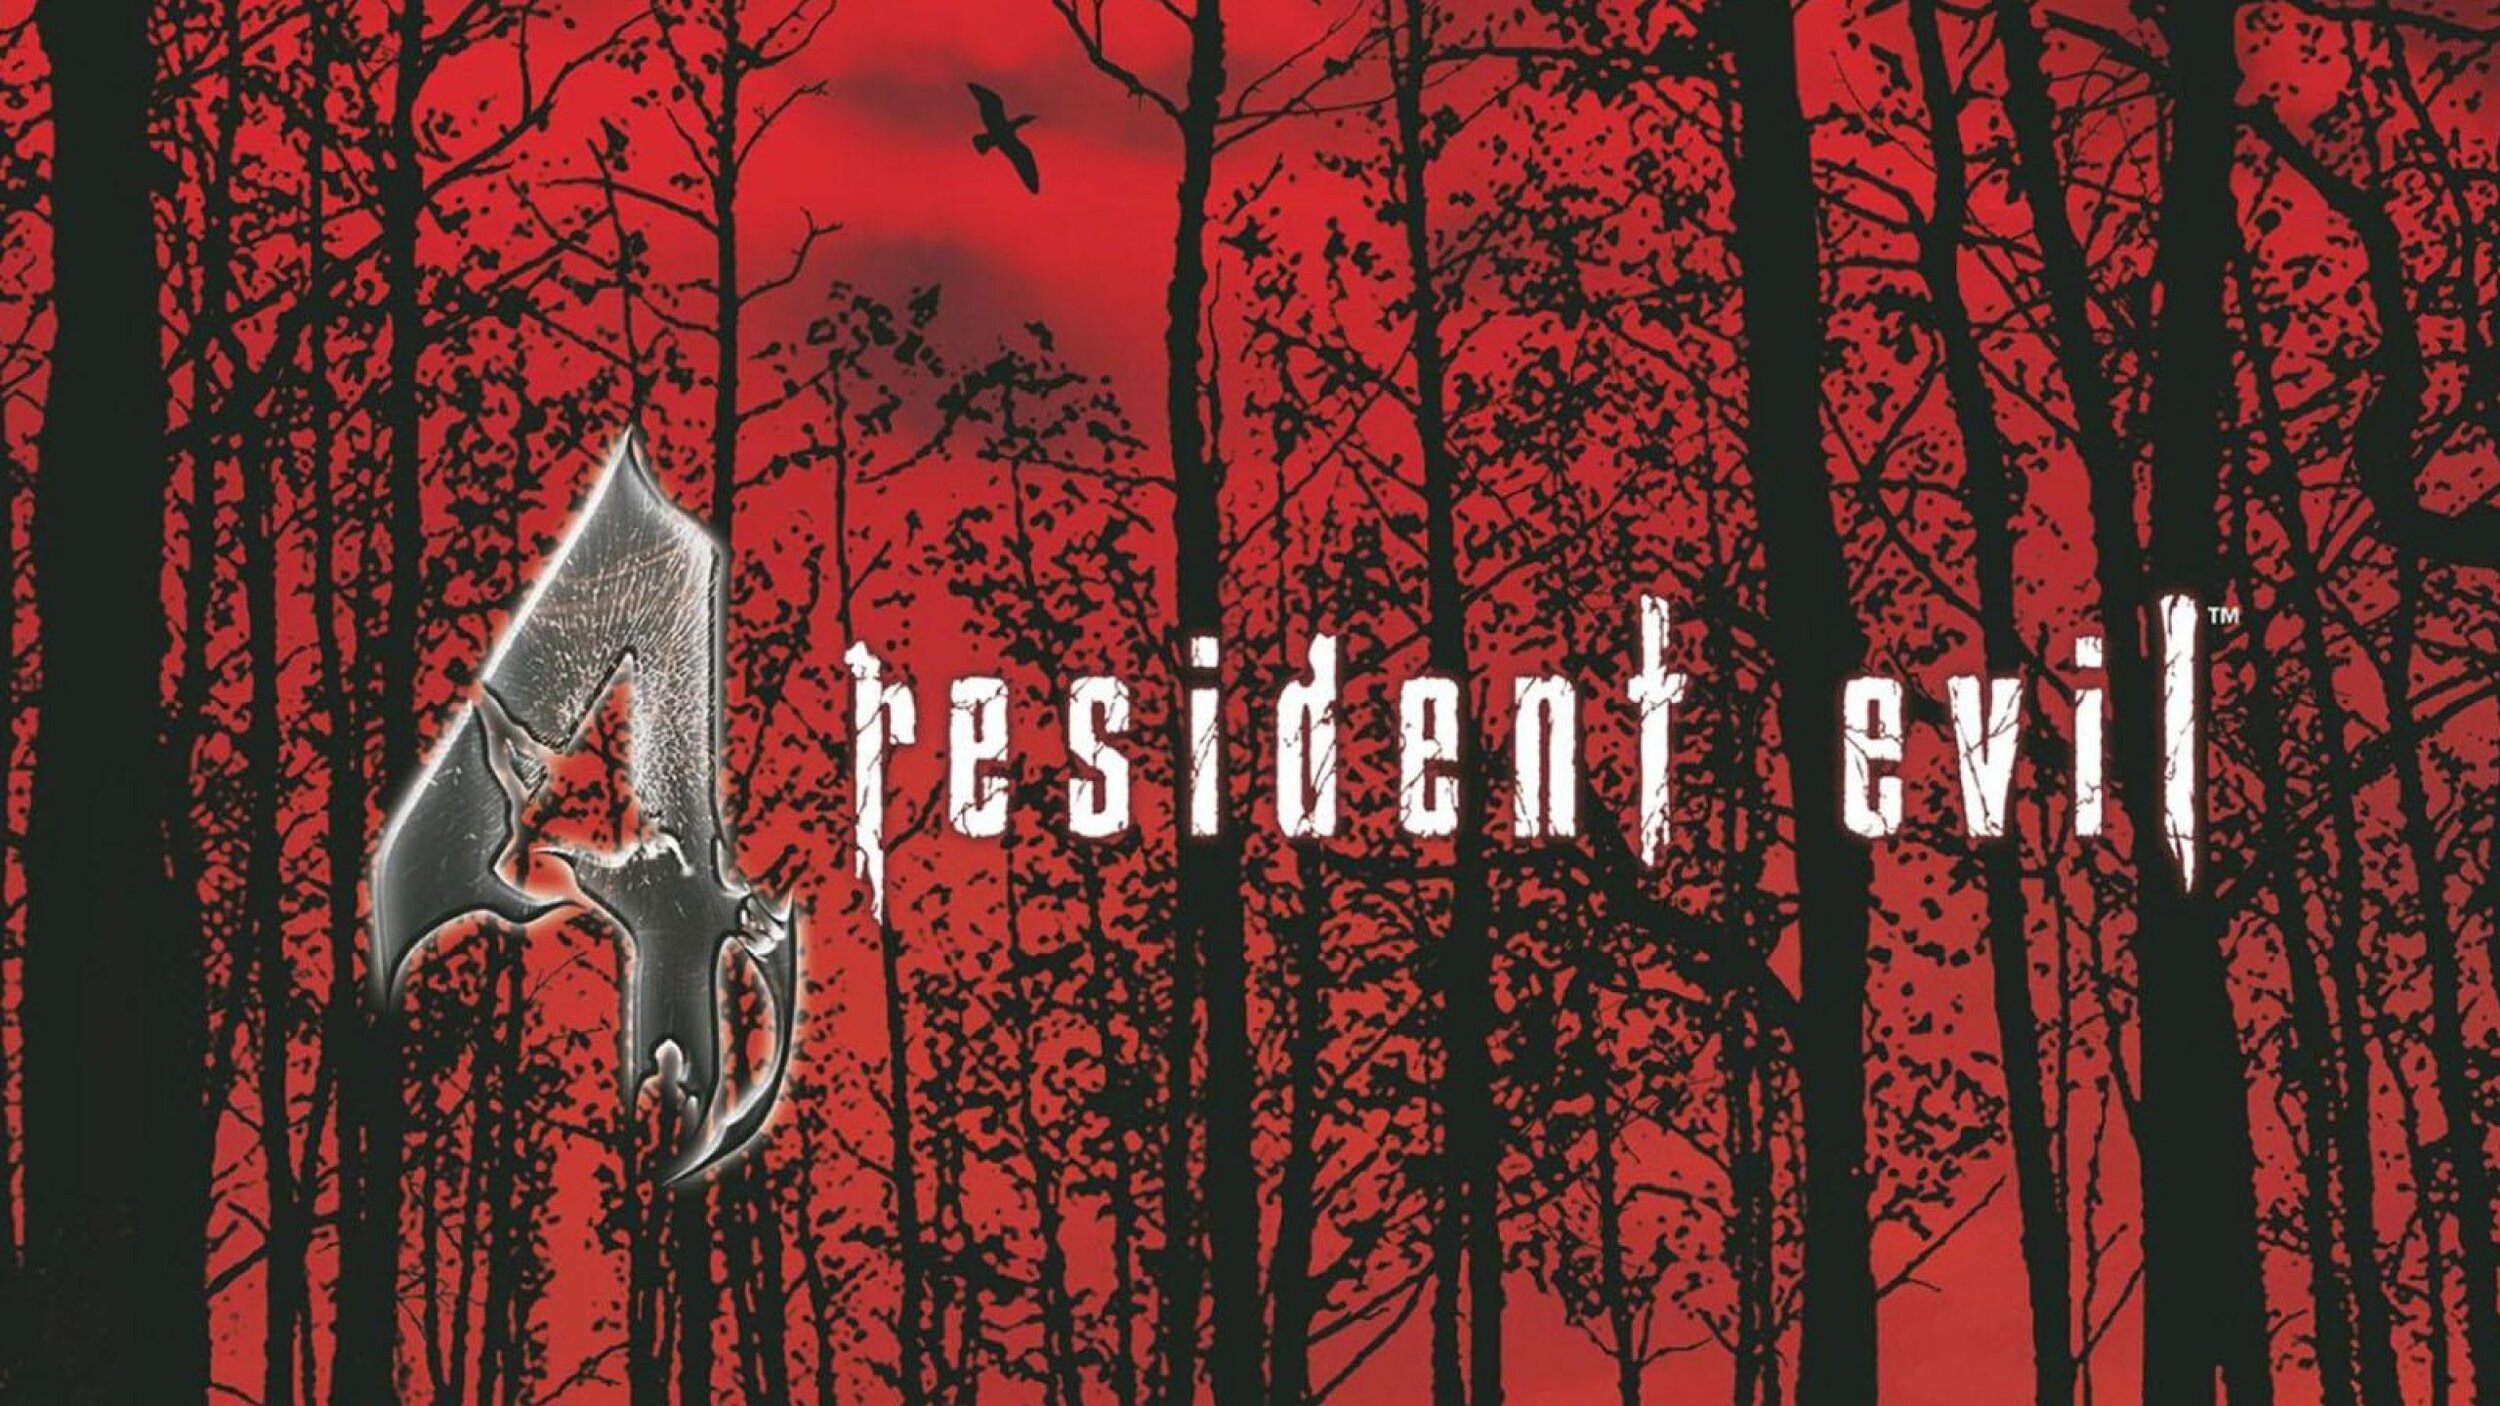 Steam resident evil 4 ultimate hd фото 51